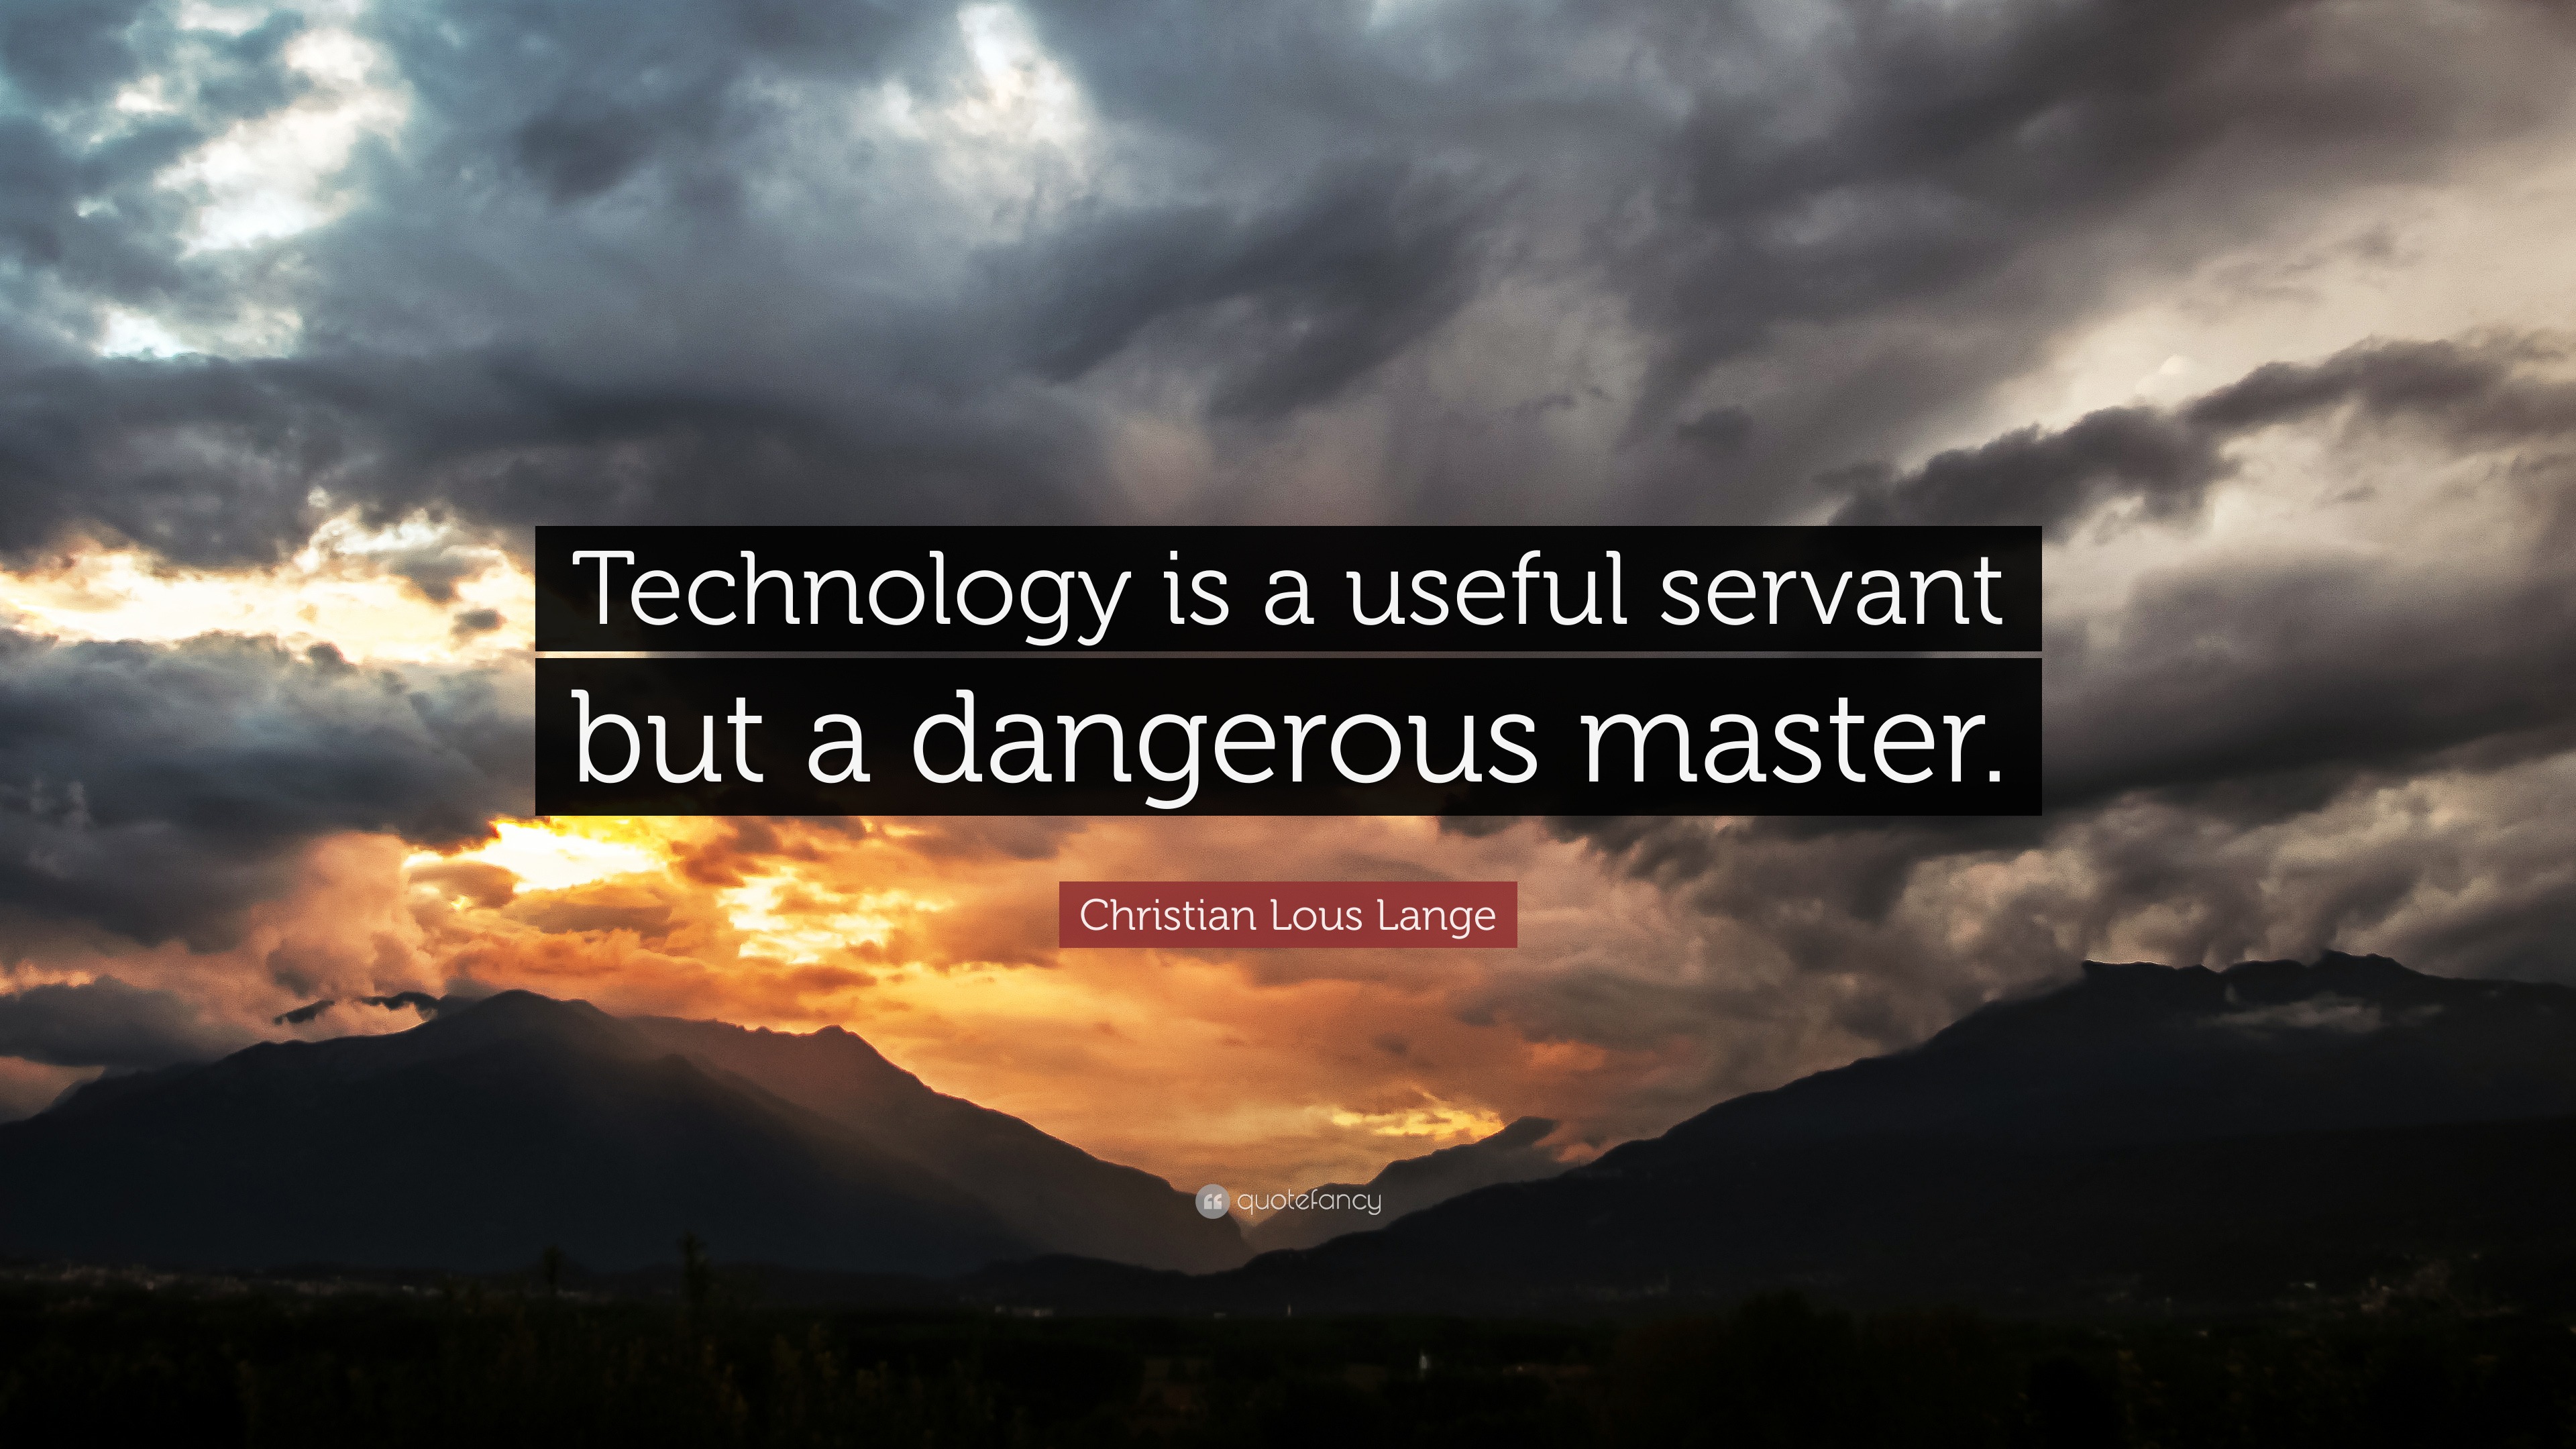 essay on technology is a useful servant but dangerous master